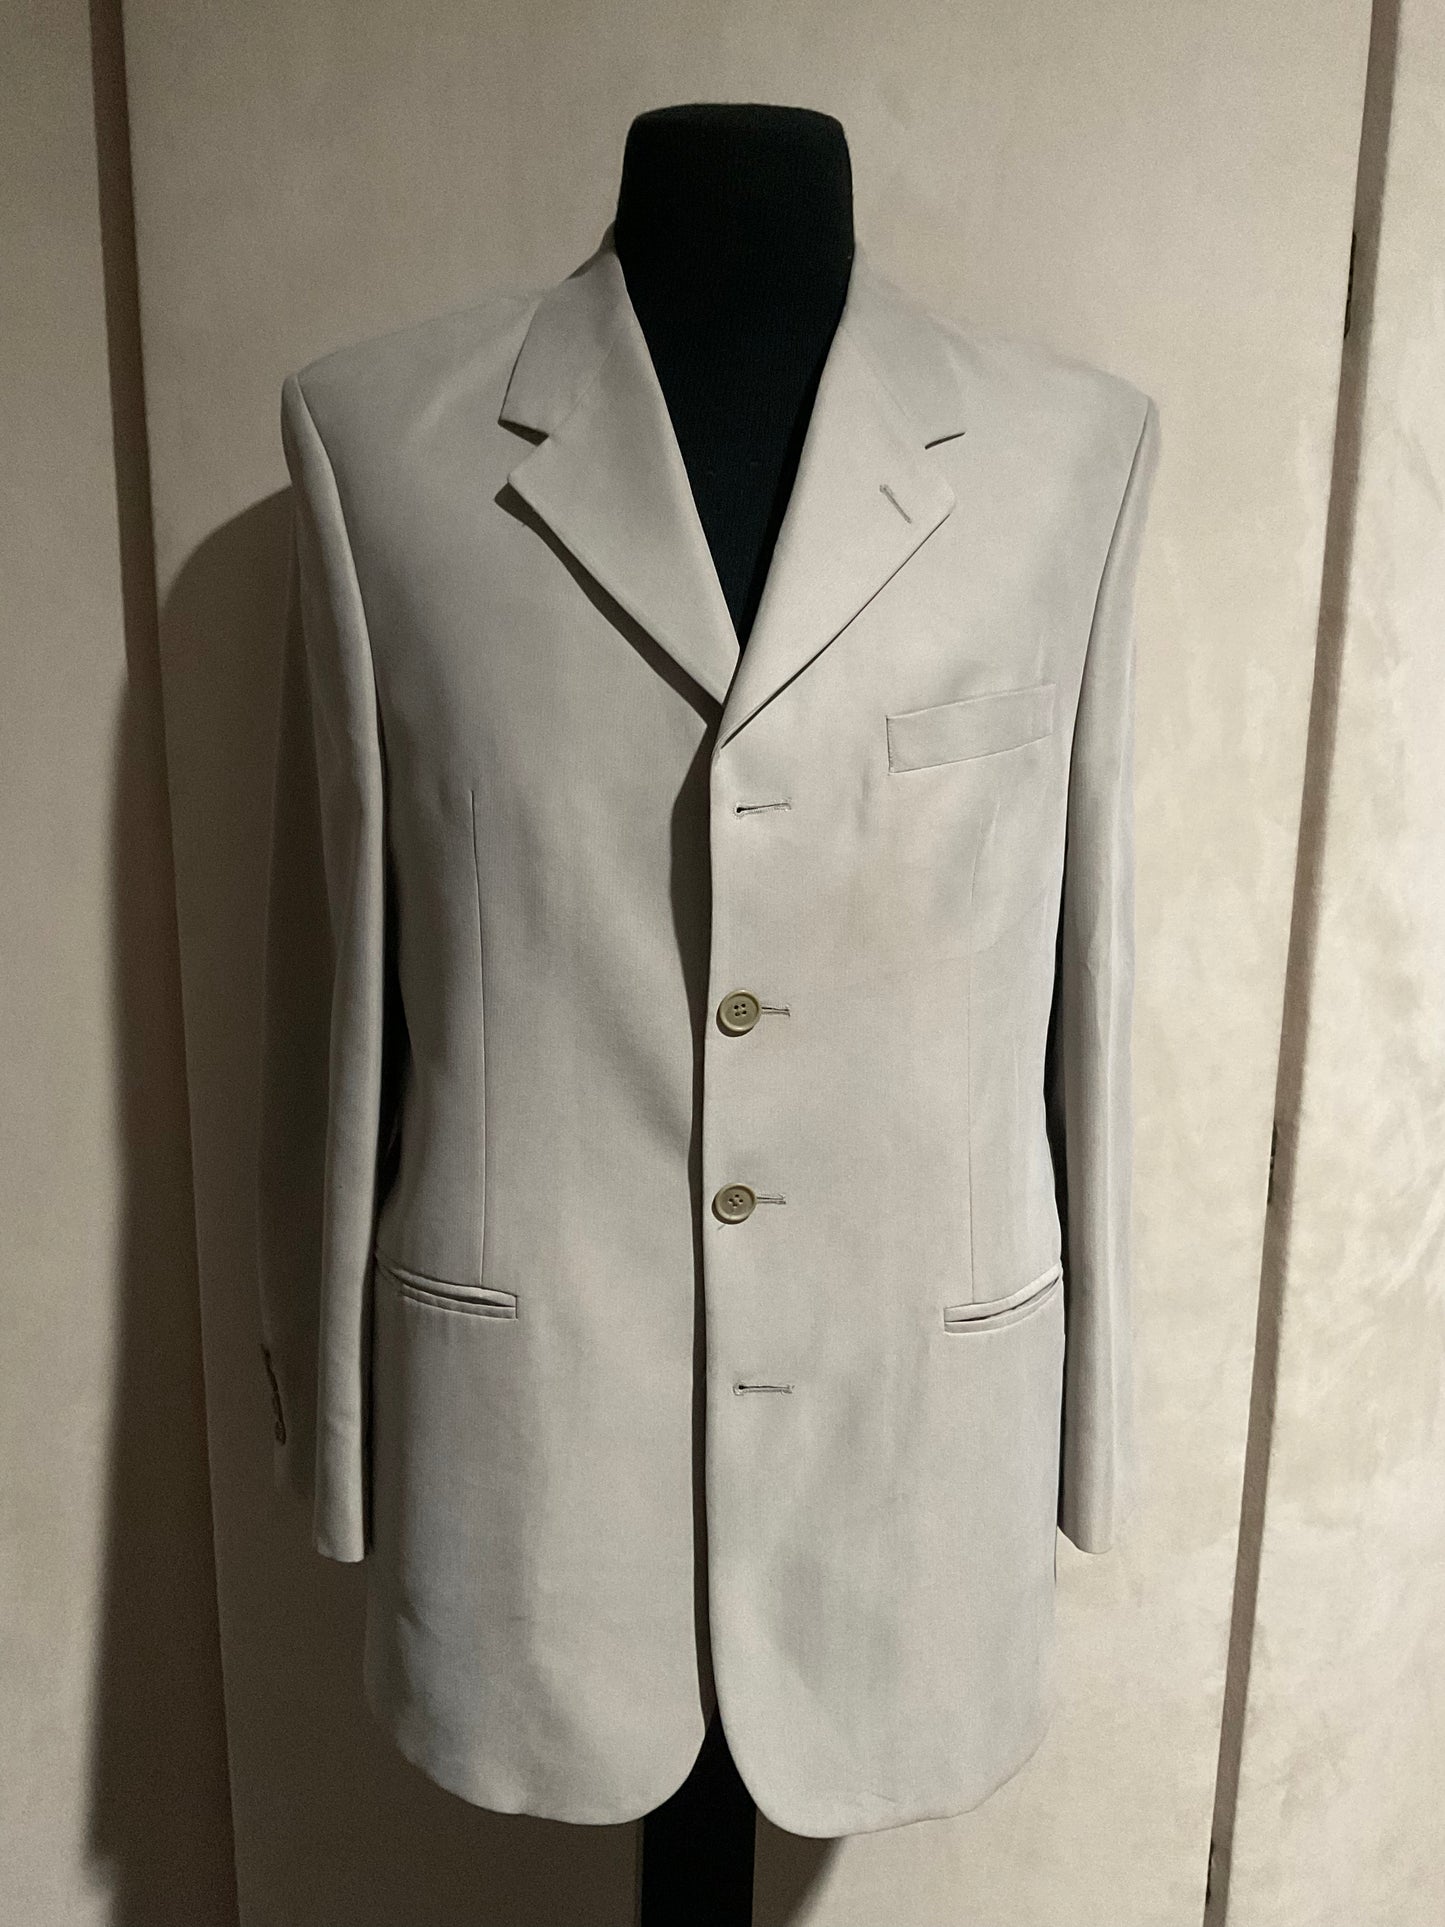 R P SUIT / TAUPE / 4 BUTTON / 40 REG / MADE IN CANADA